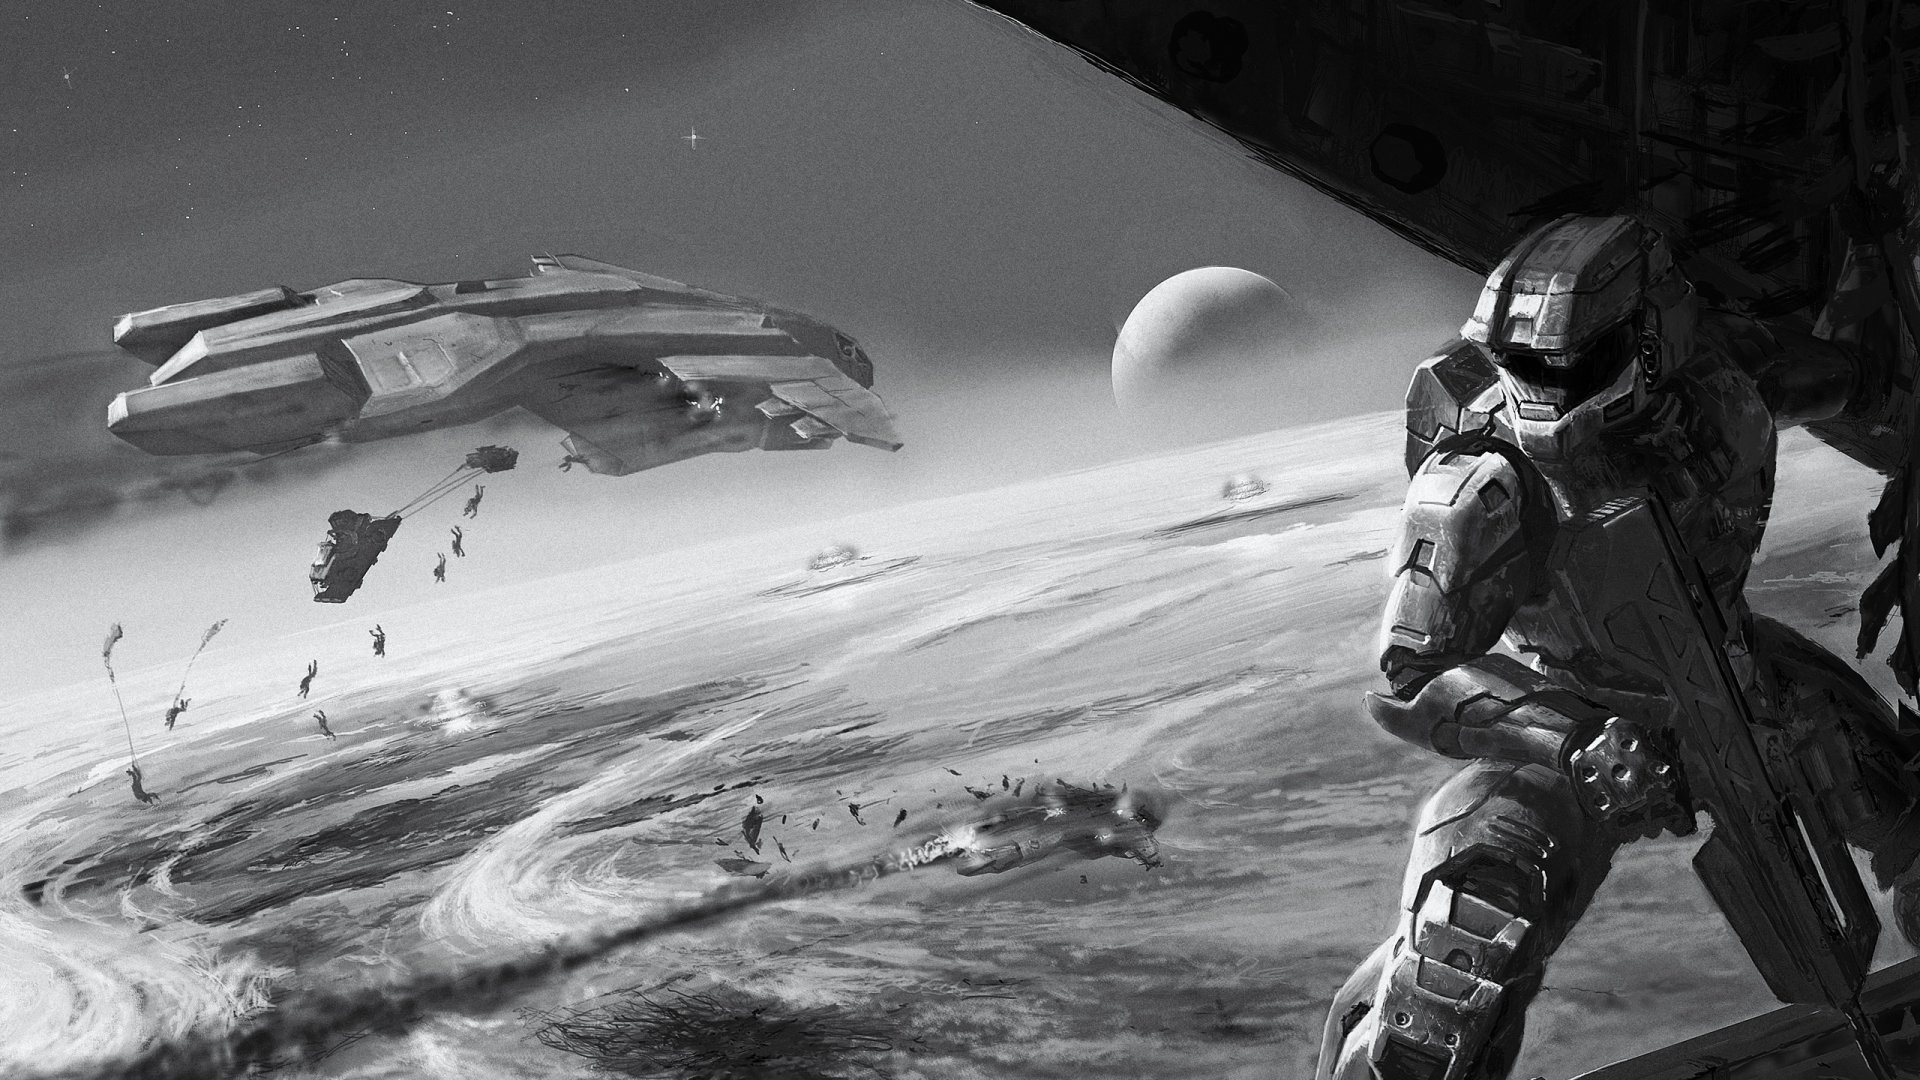 General 1920x1080 video games space Halo Wars monochrome spaceship planet gray artwork science fiction video game art